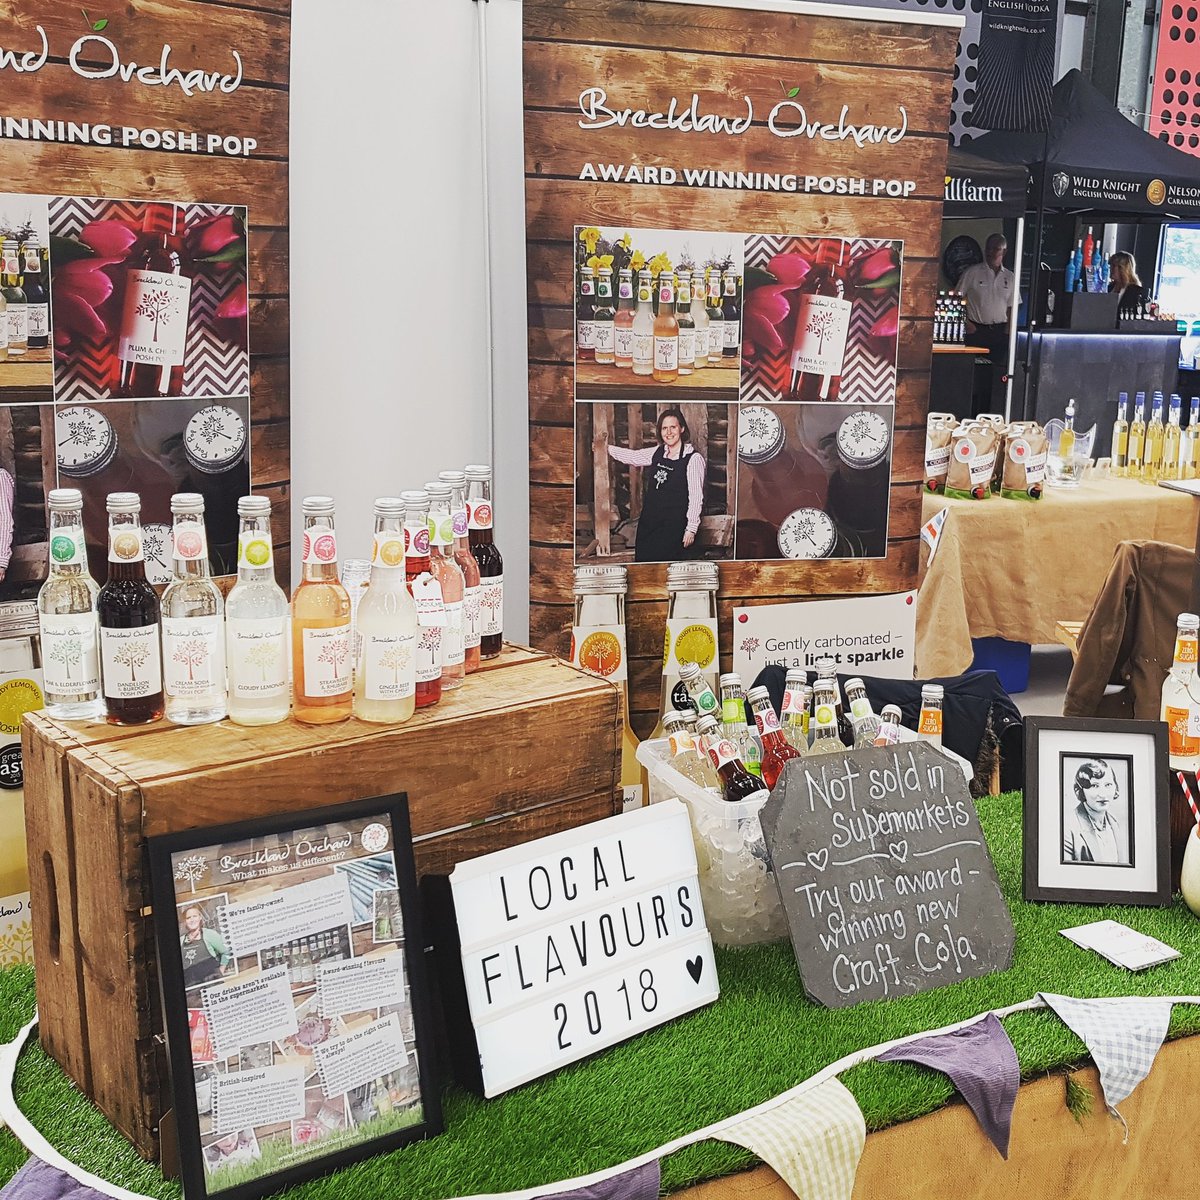 All set up at #LocalFlavours2018 at the Royal Norfolk showground. A trade show with a difference x #localflavours . Cheers x